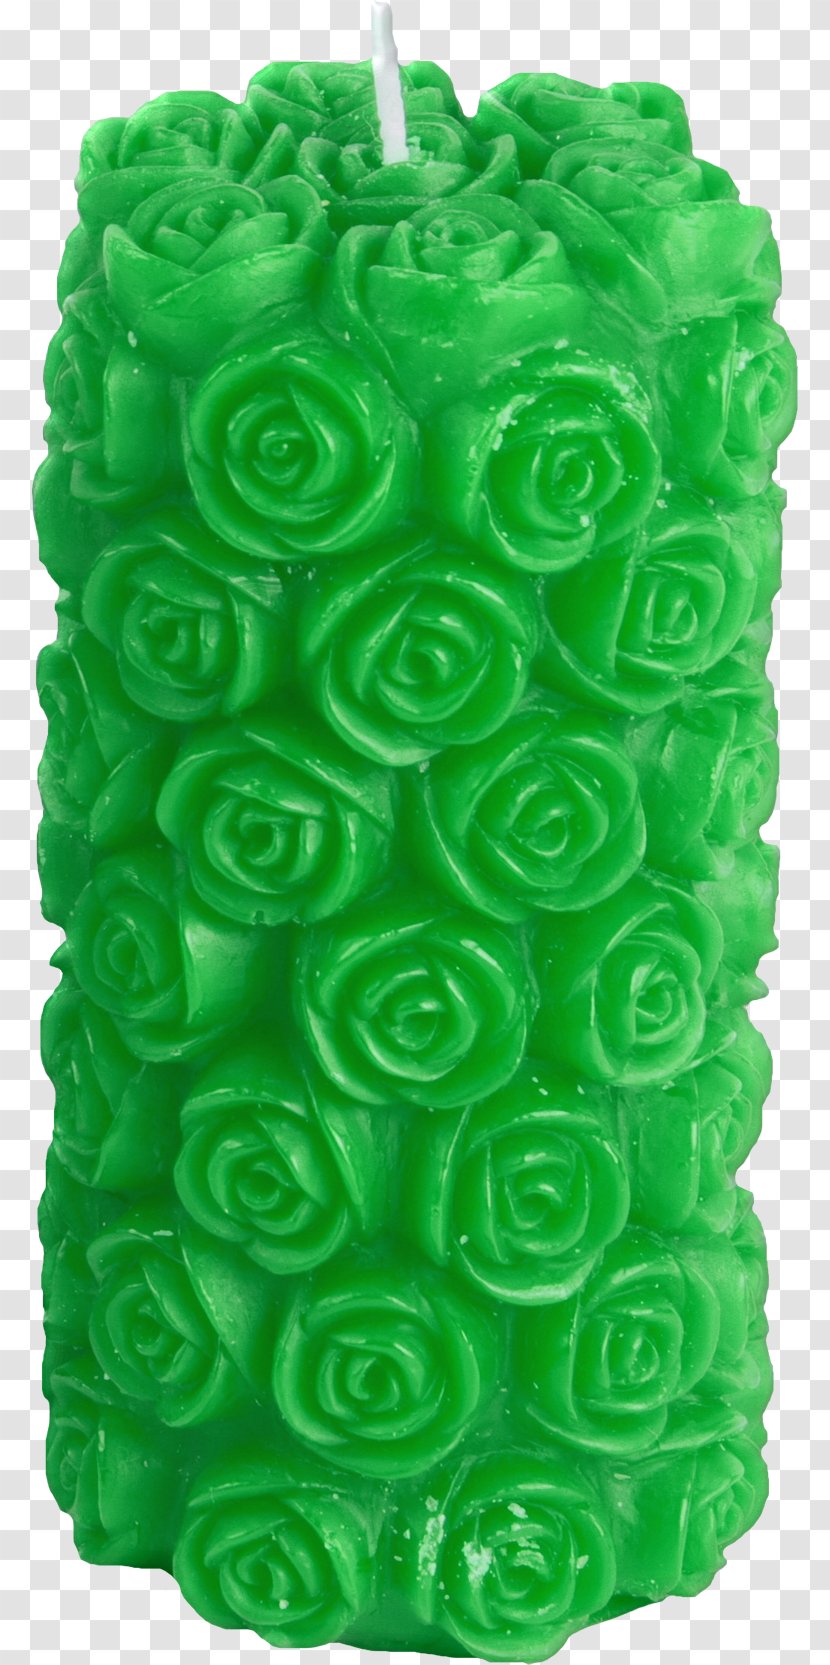 Ubon Ratchathani Candle Festival Beach Rose Green - Gratis - Material Free To Pull Transparent PNG